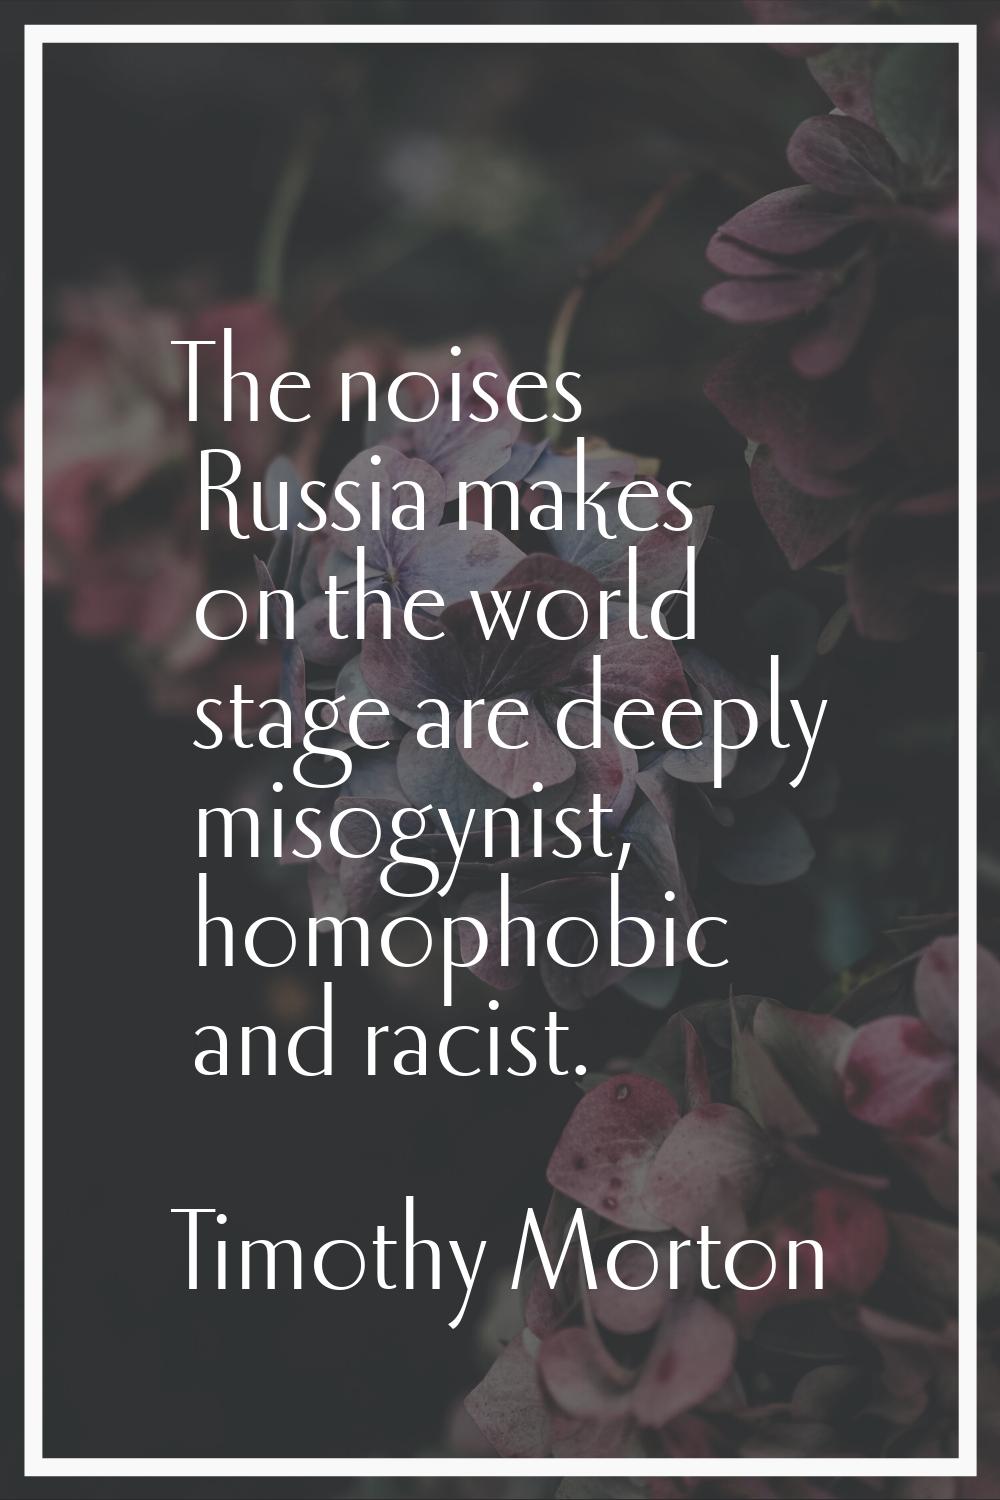 The noises Russia makes on the world stage are deeply misogynist, homophobic and racist.